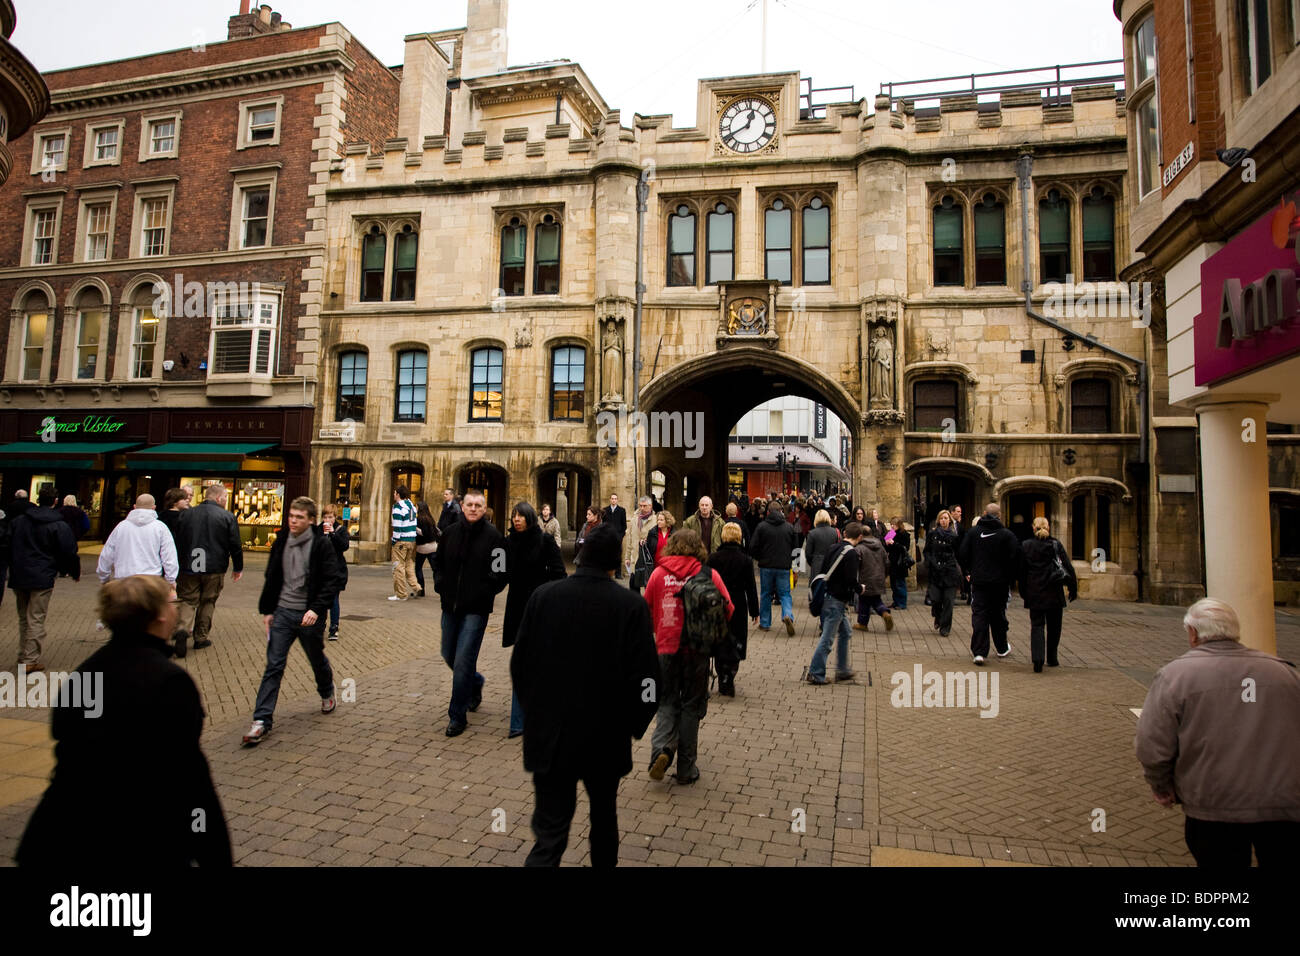 The busy shopping area in the Bailgate area of Lincoln. A mix of medieval and modern styles Stock Photo